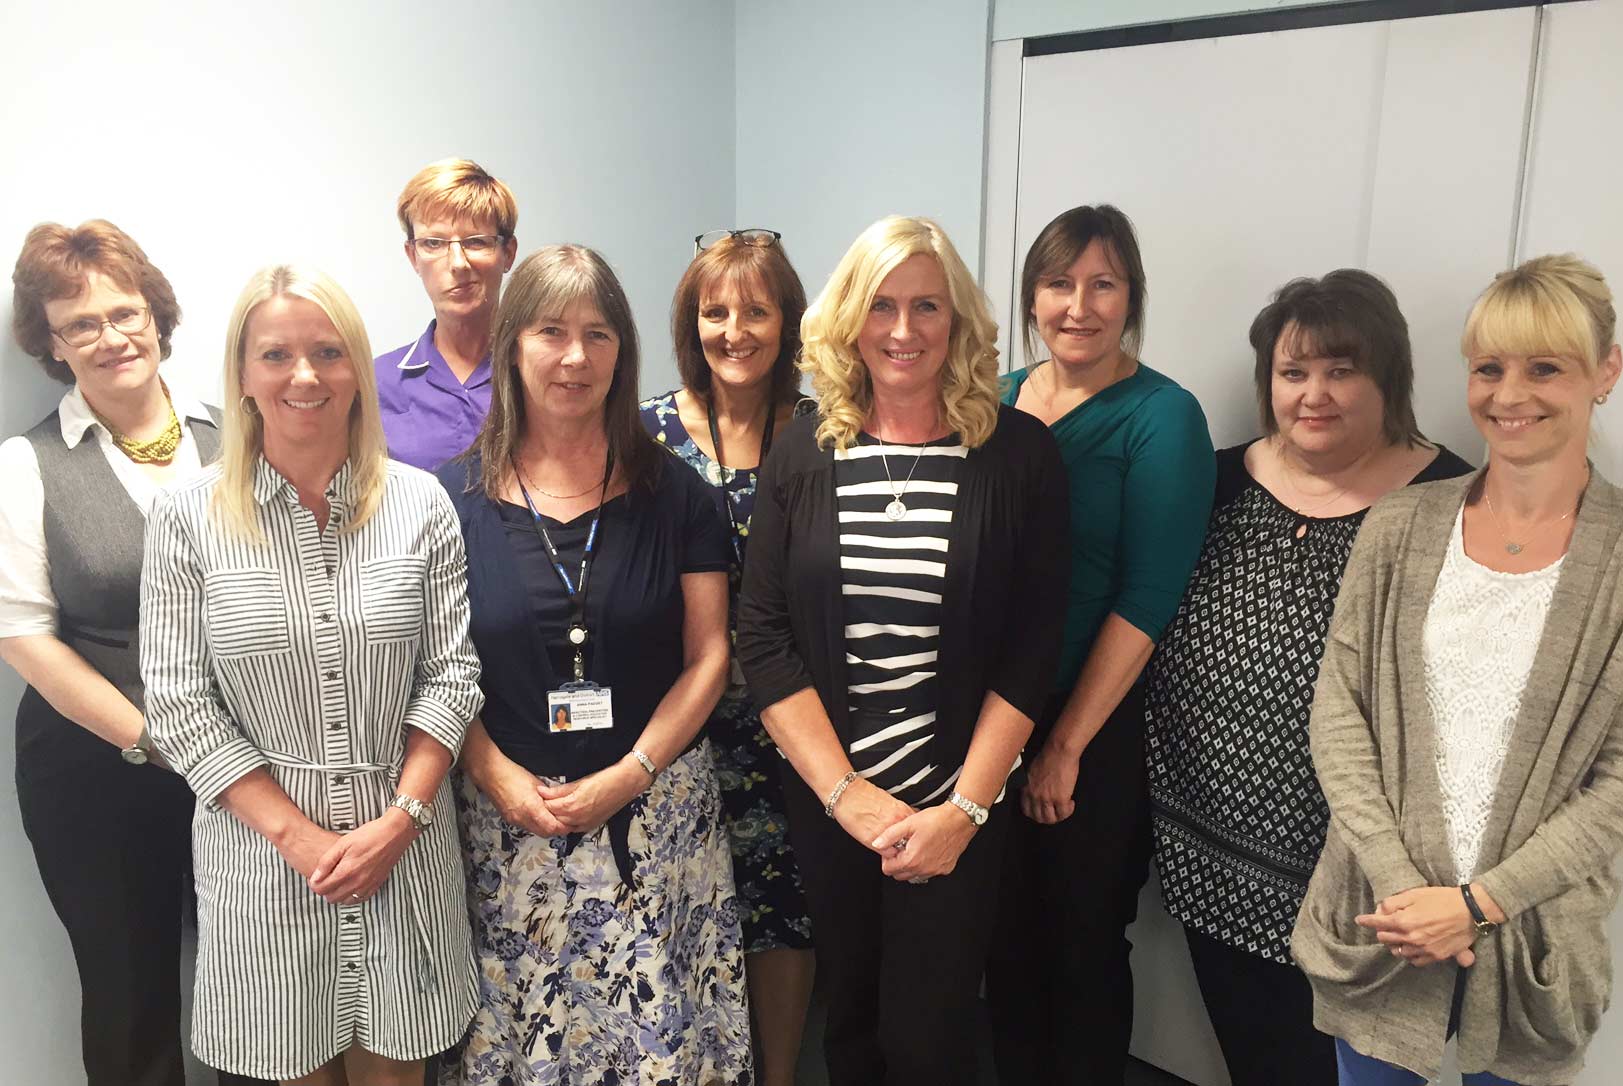 Harrogate and District NHS Foundation Trust’s Community Infection Prevention and Control team